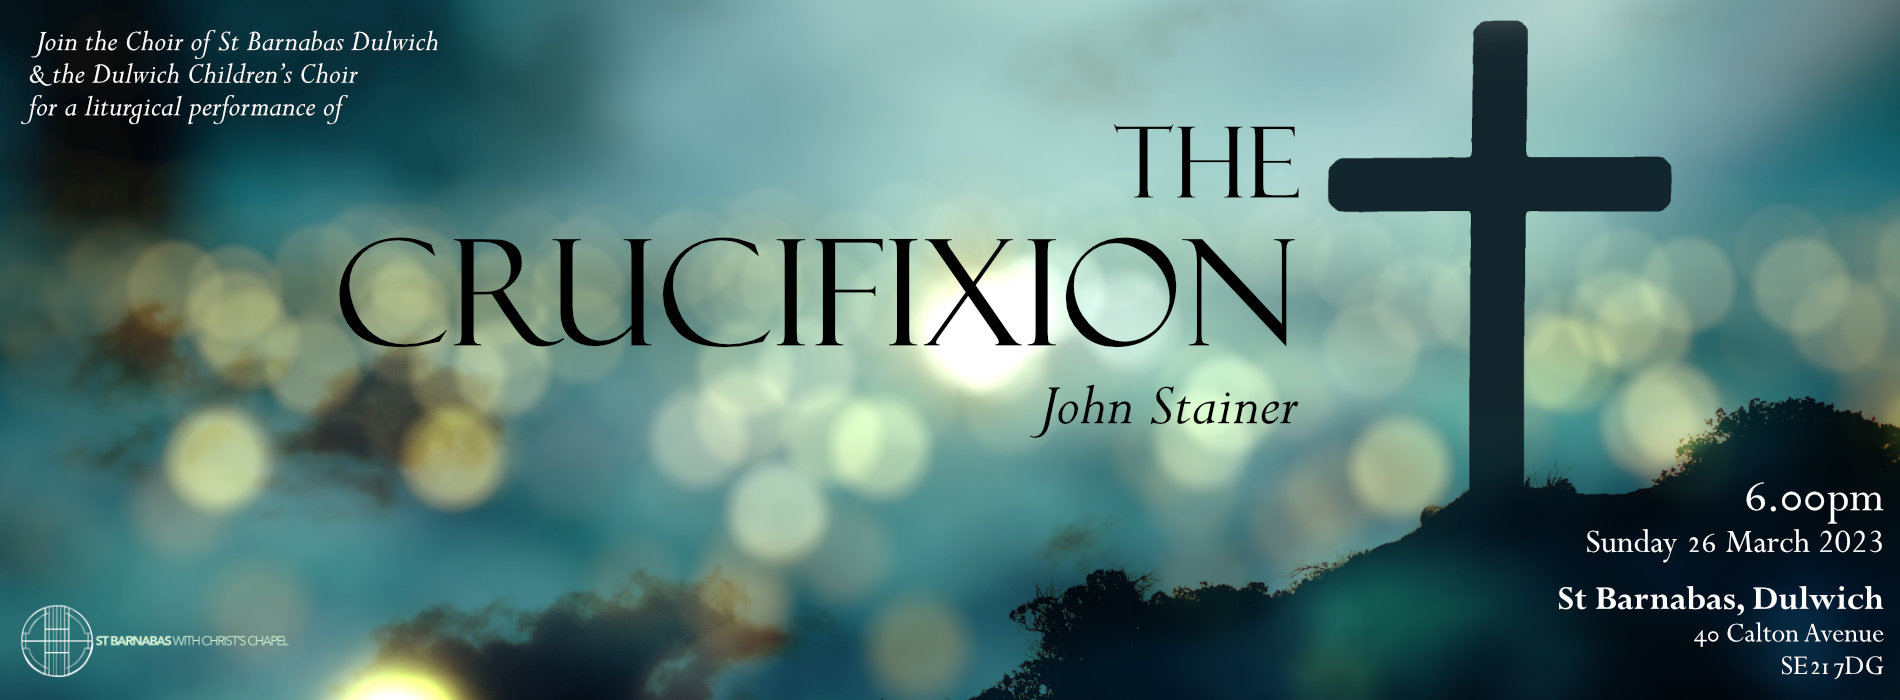 Advertisement for The Crucifixion by John Stainer. Sunday 26 March, 6pm.